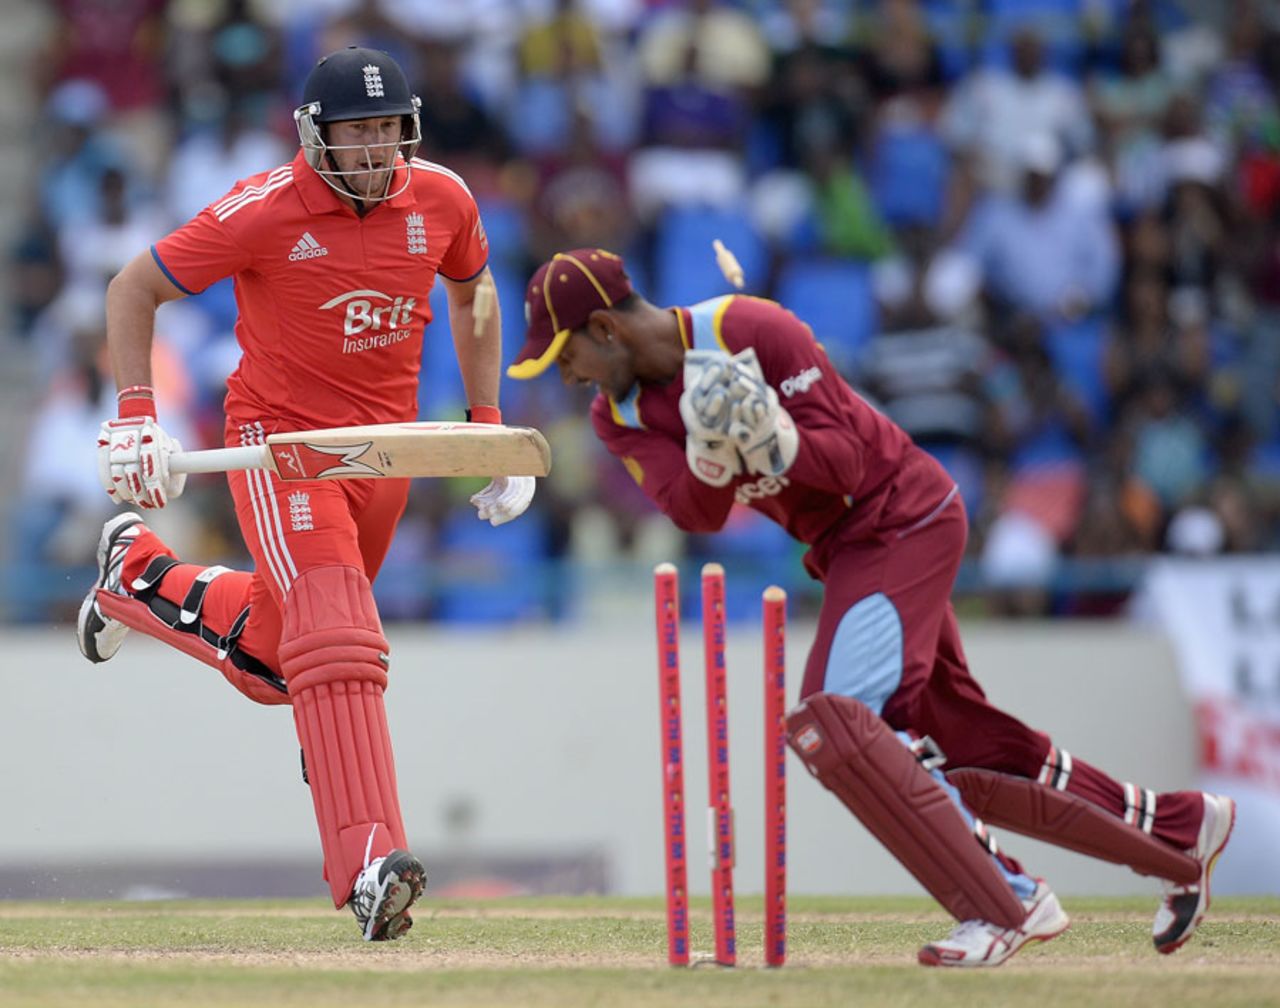 After a mix up, Tim Bresnan was easily run out, West Indies v England, 2nd ODI, North Sound, March 2, 2014